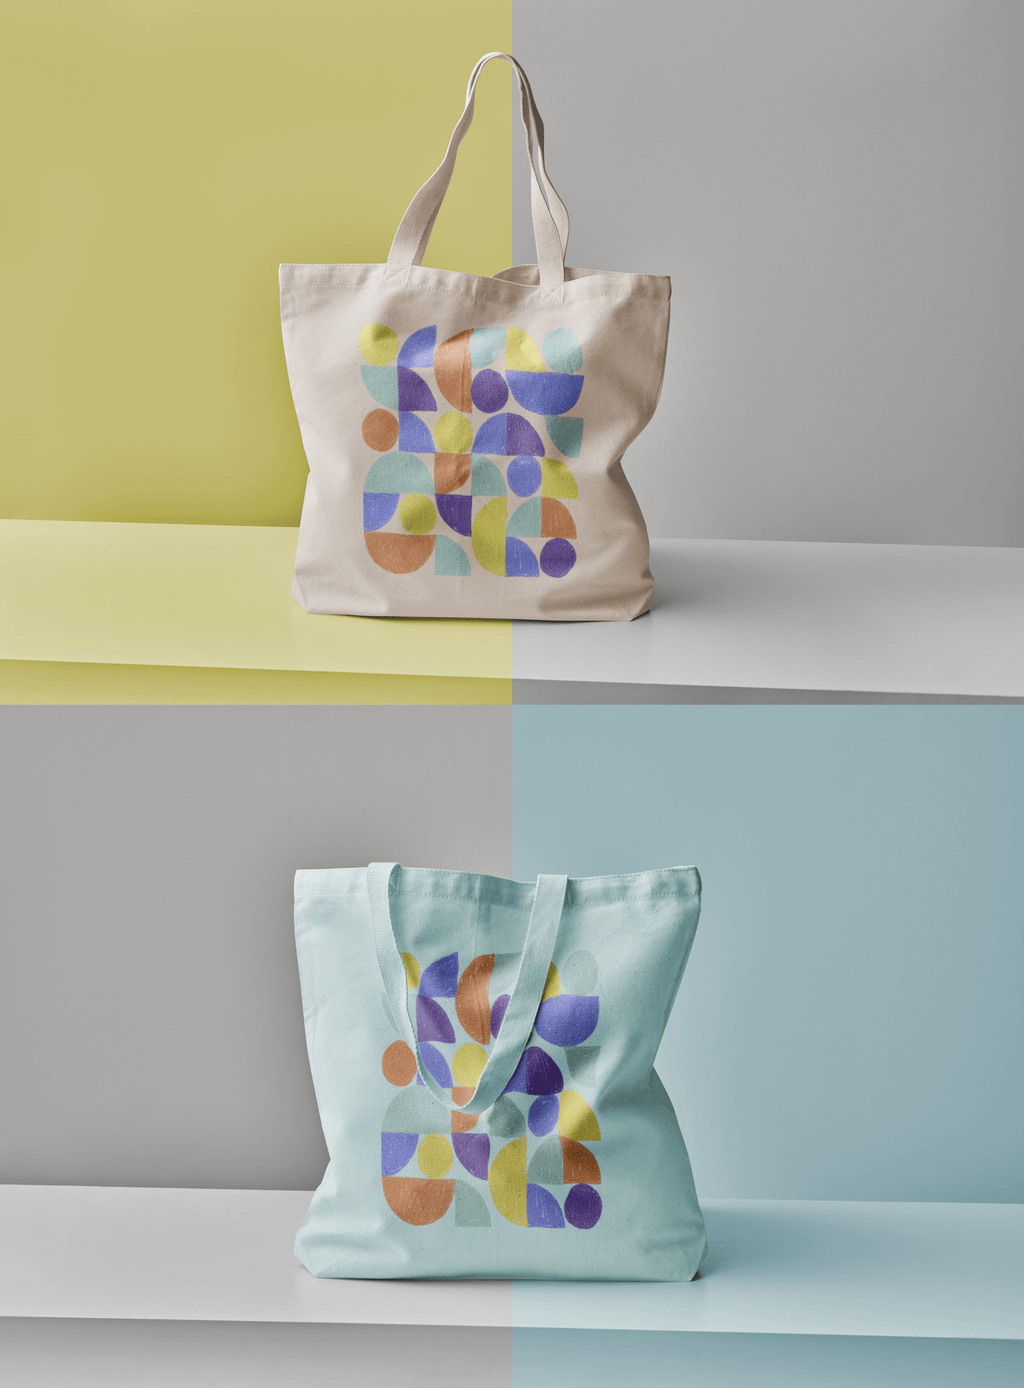 High-quality Canvas Tote Bag Mockup displayed on a neutral background, showcasing vibrant design possibilities.